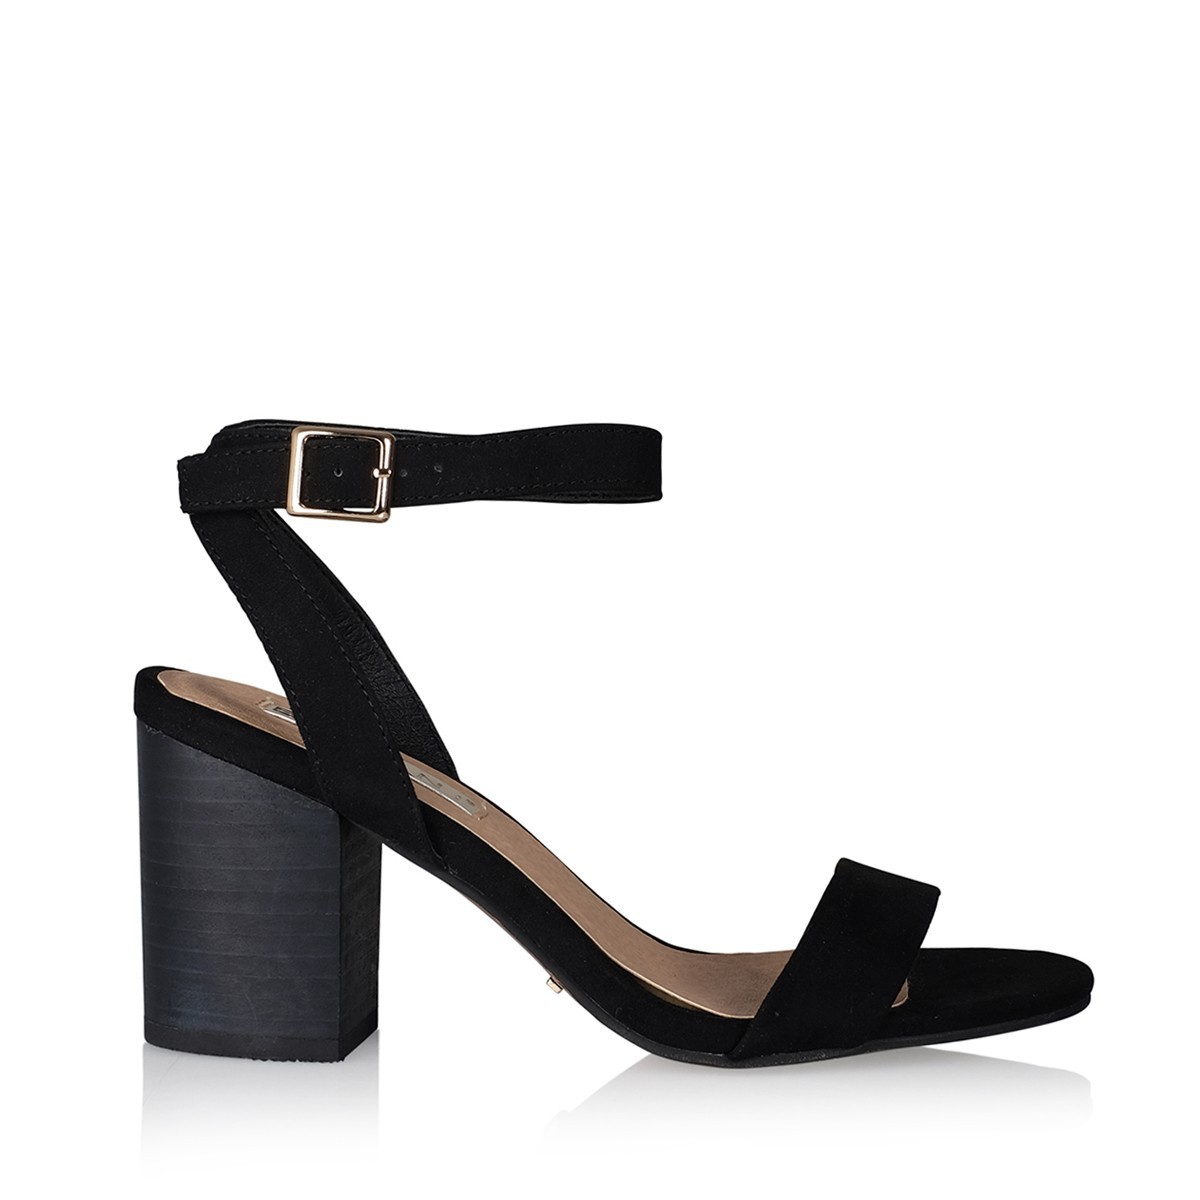 Carlina Black Suede by Billini Shoes on Sale | ShoeSales